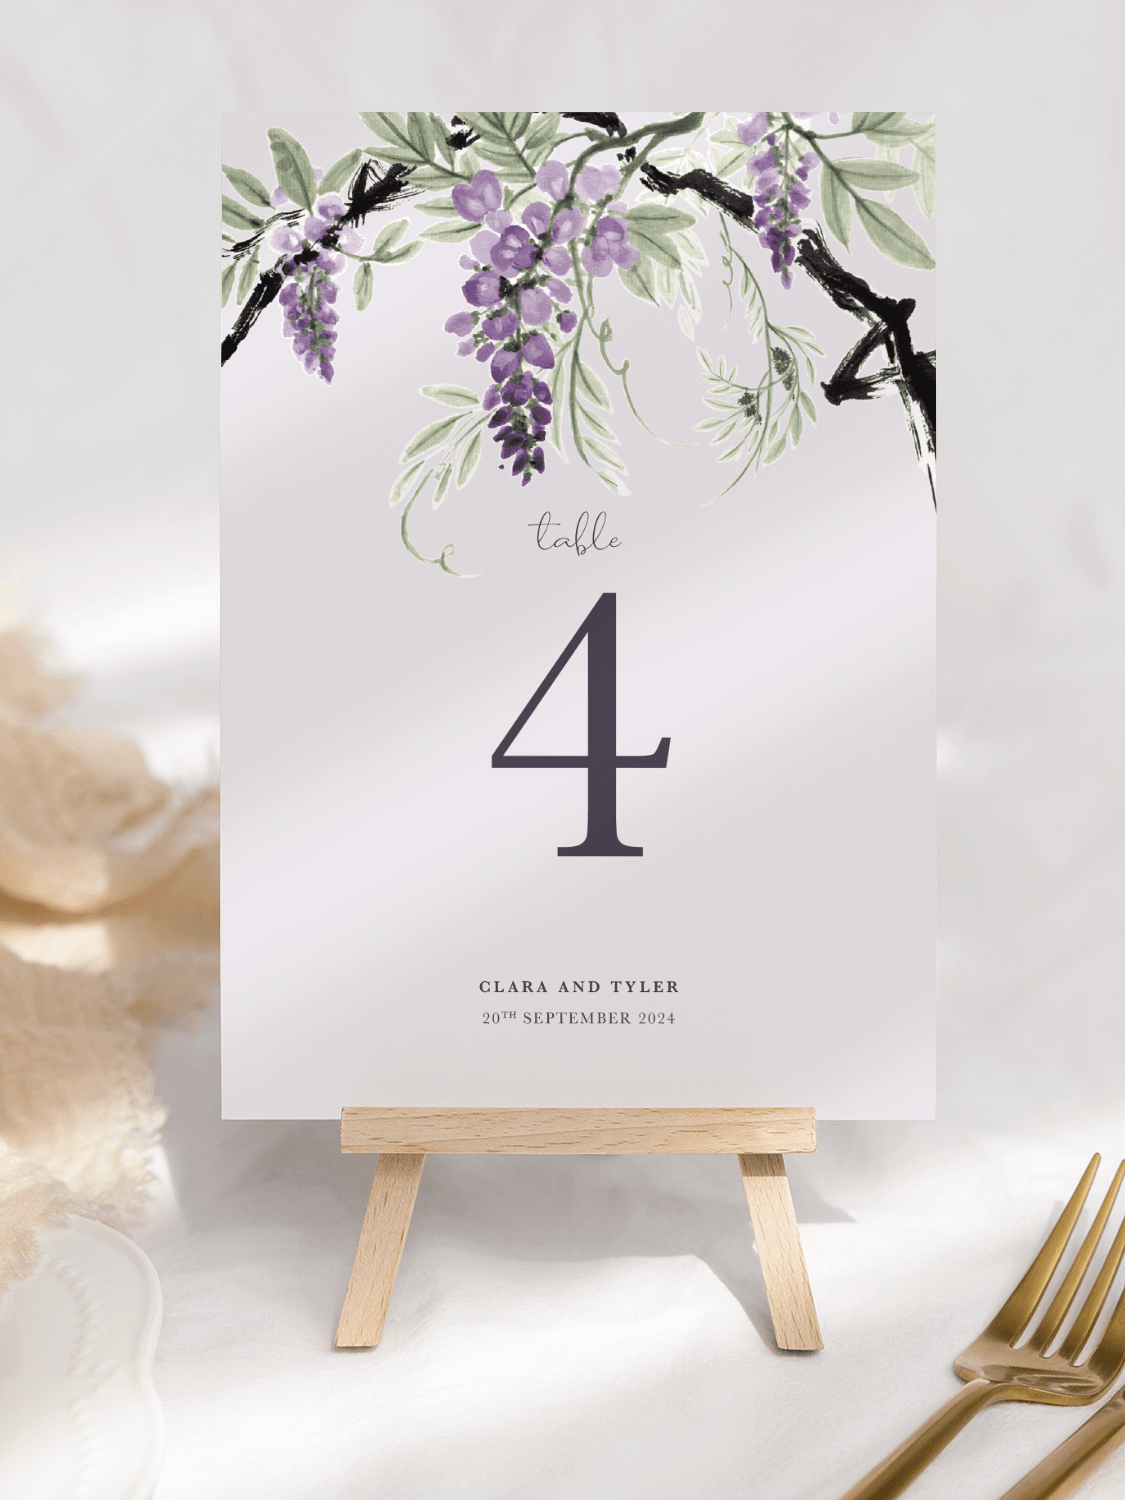 Plum and Lilac Wisteria Wedding Table Numbers - V1 Bower in Lilac